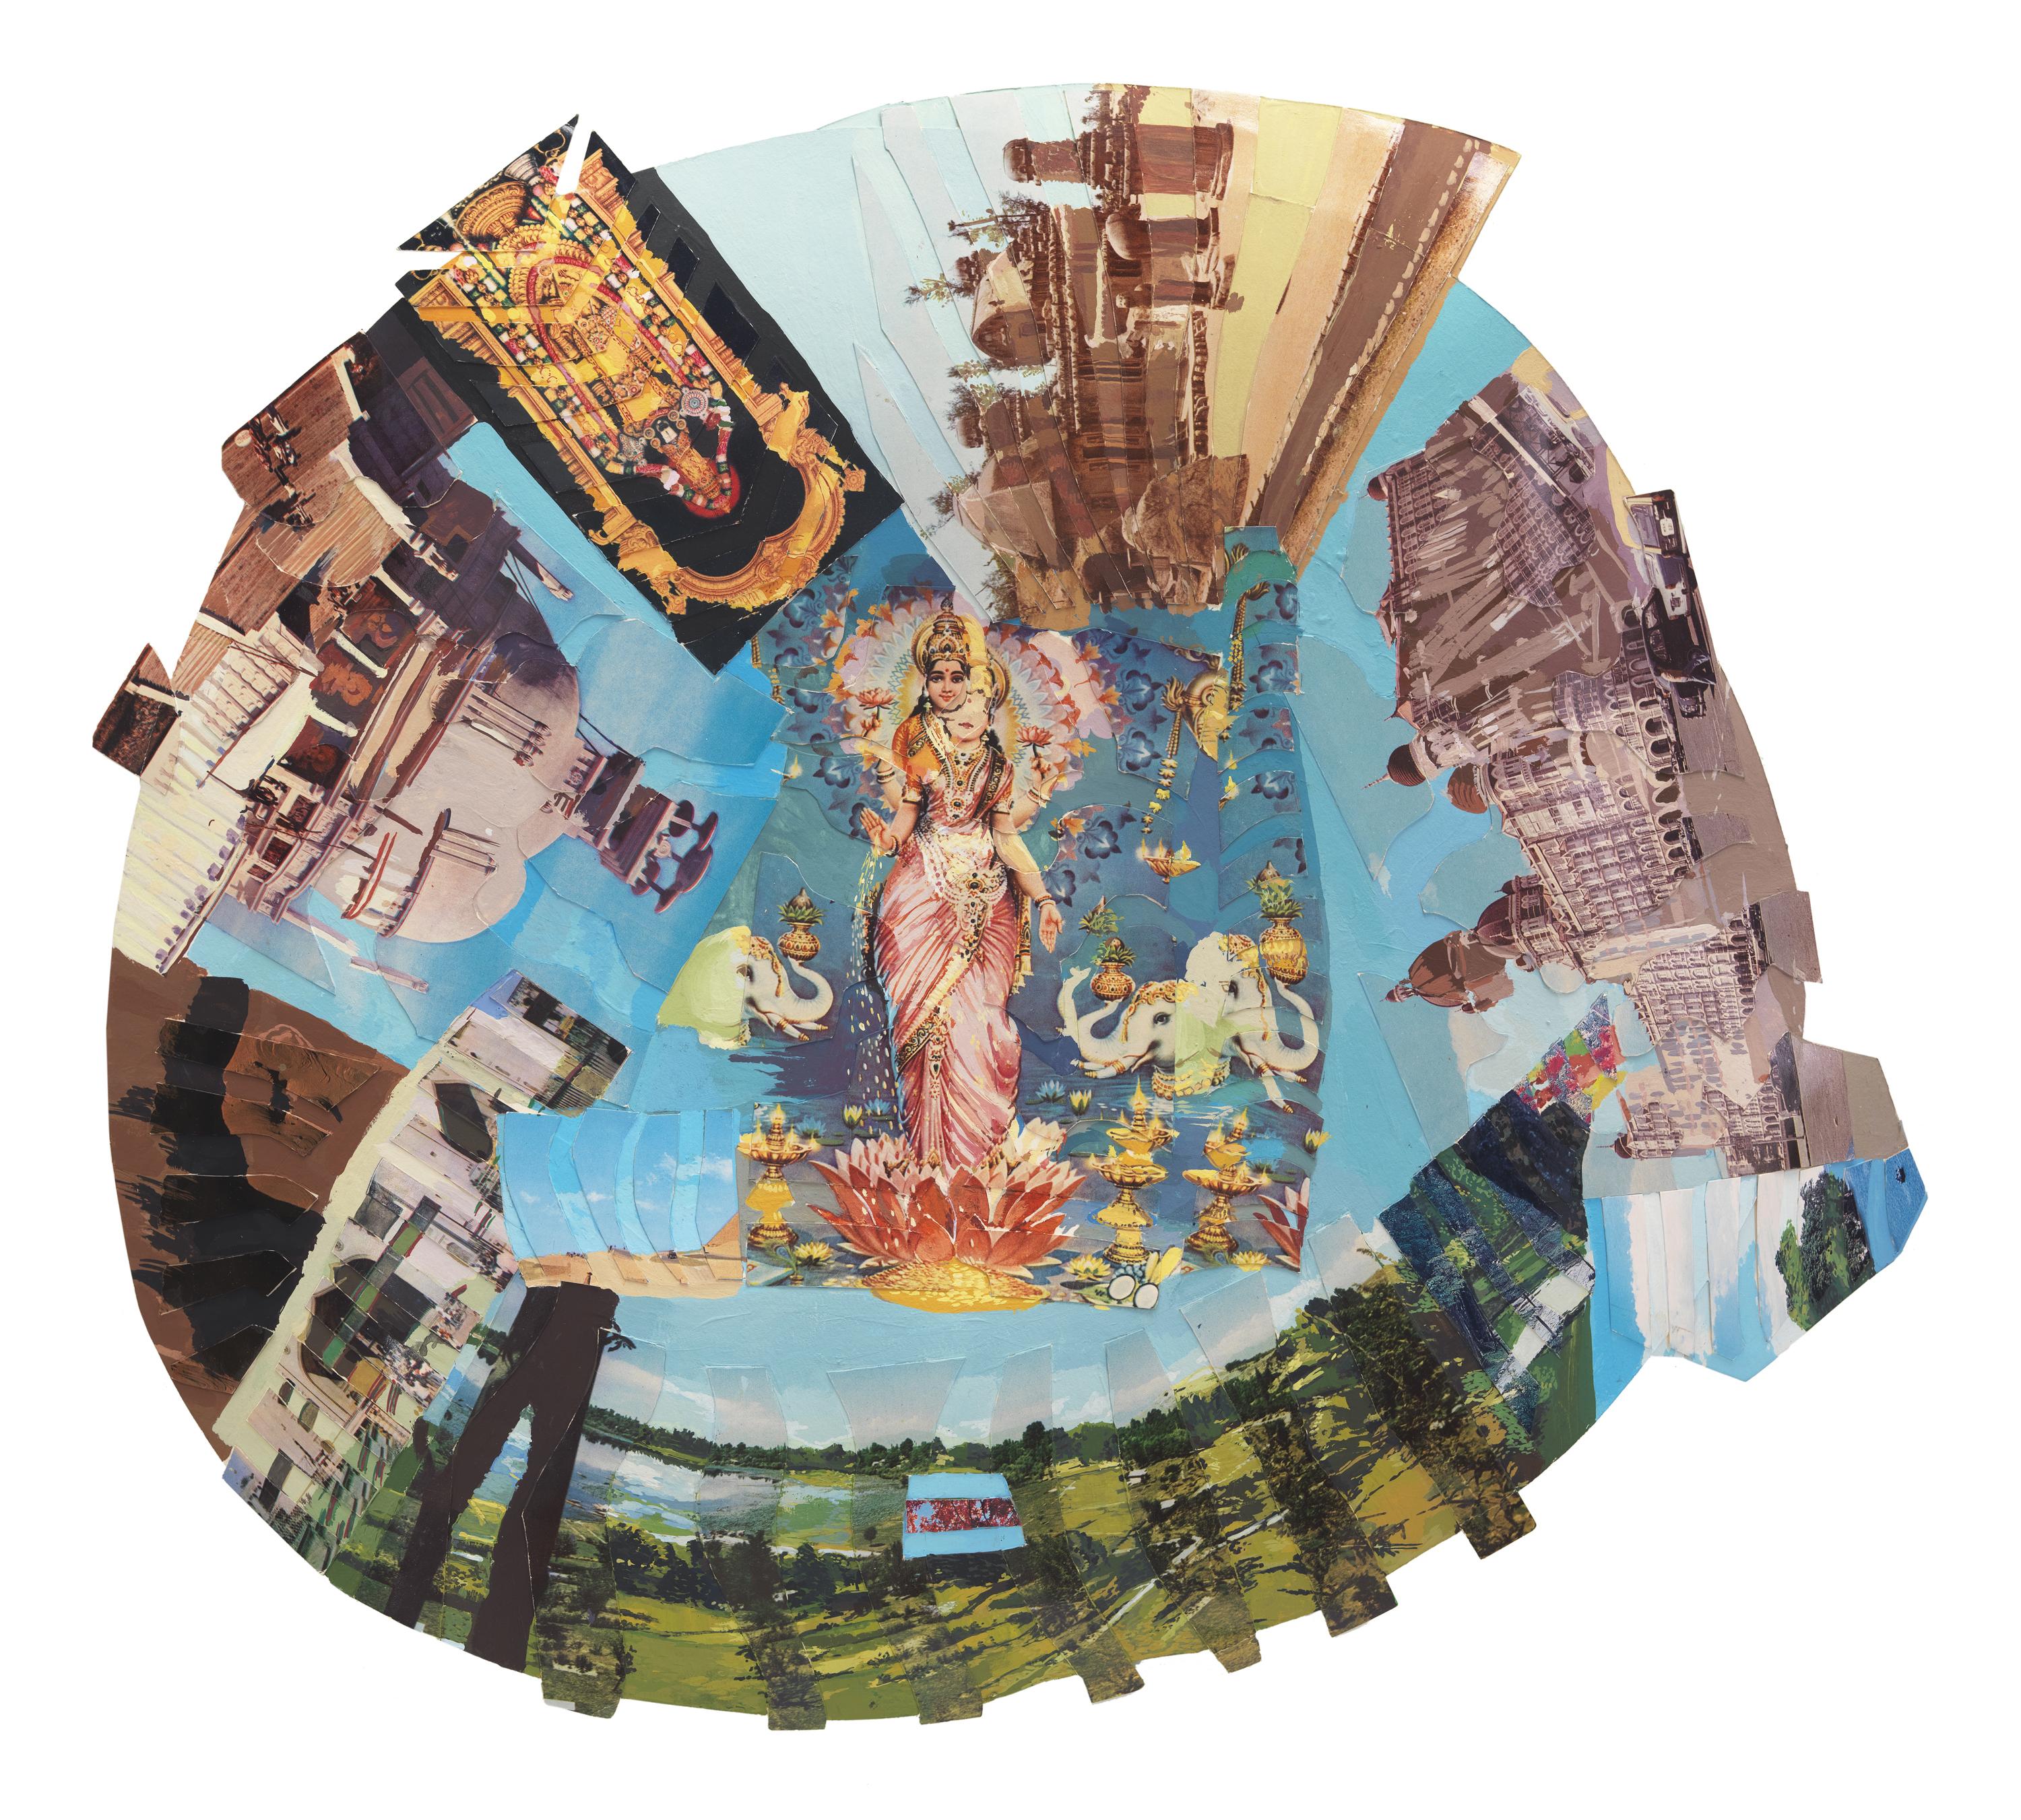 A vaguely circular collage features an ornately dressed adult woman against a sky blue background at its center, surrounded by images of various buildings and landscapes.